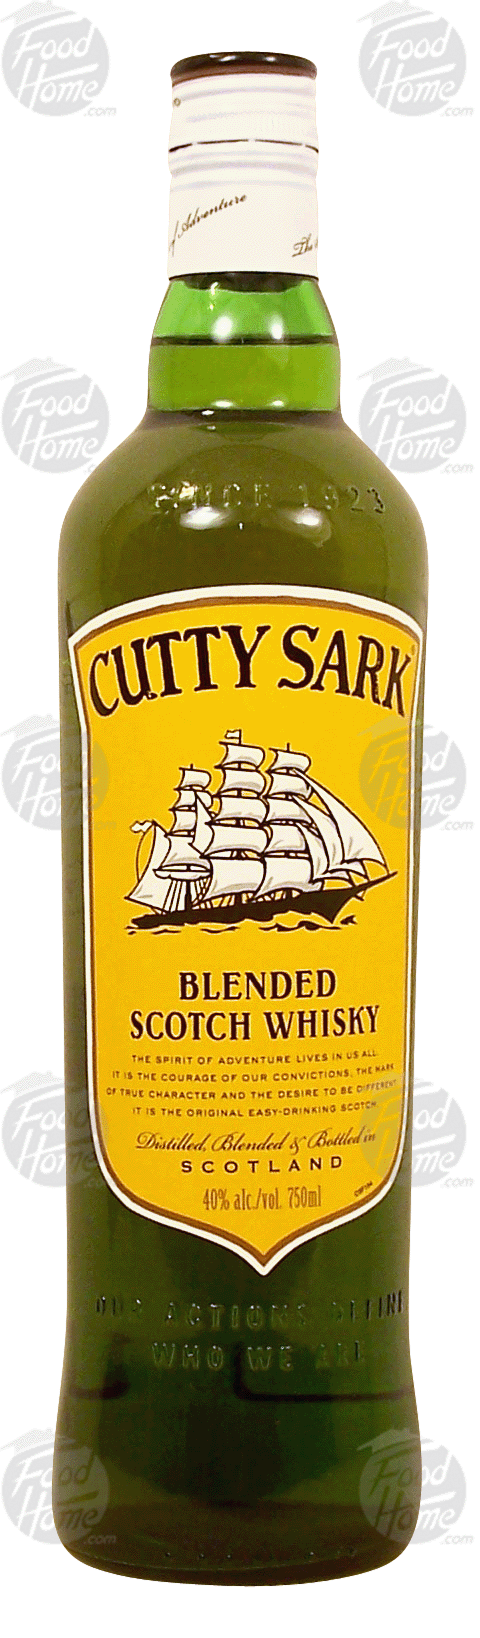 Cutty Shark  blended scotch whisky, 40% alc. by vol. Full-Size Picture